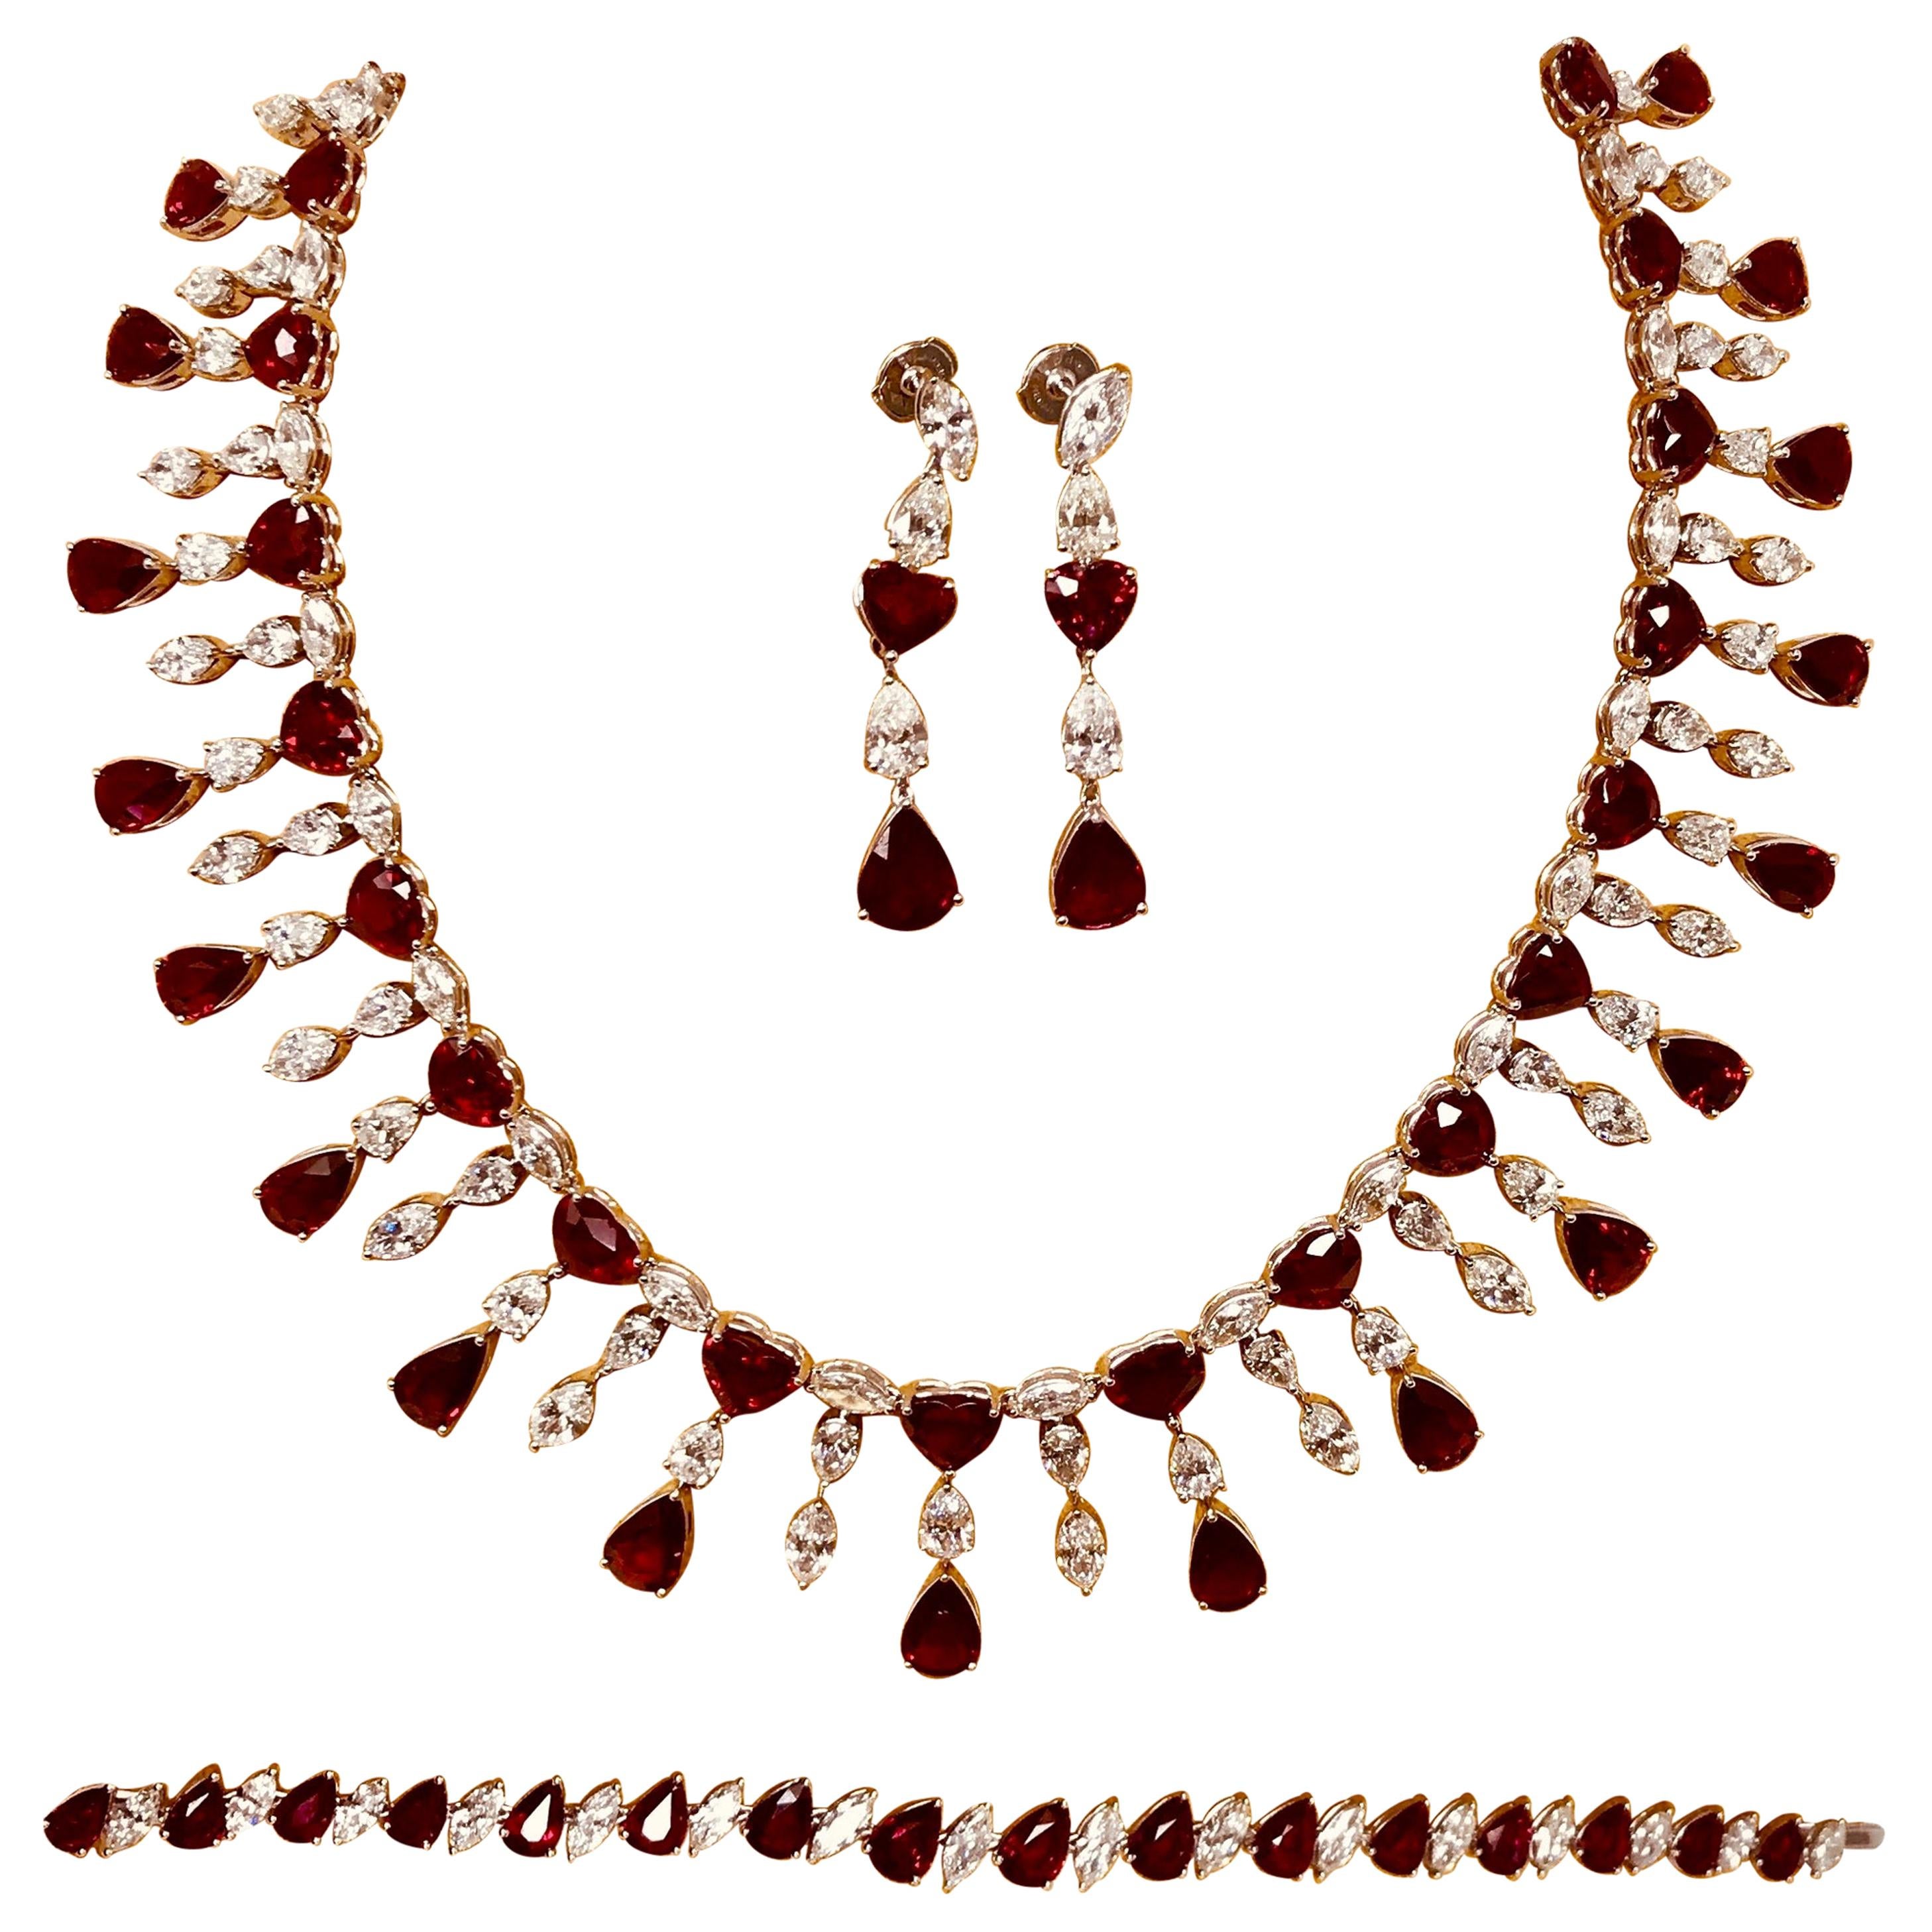 Ruby 'No Heat' and Diamond Necklace Set with Earrings and Bracelet